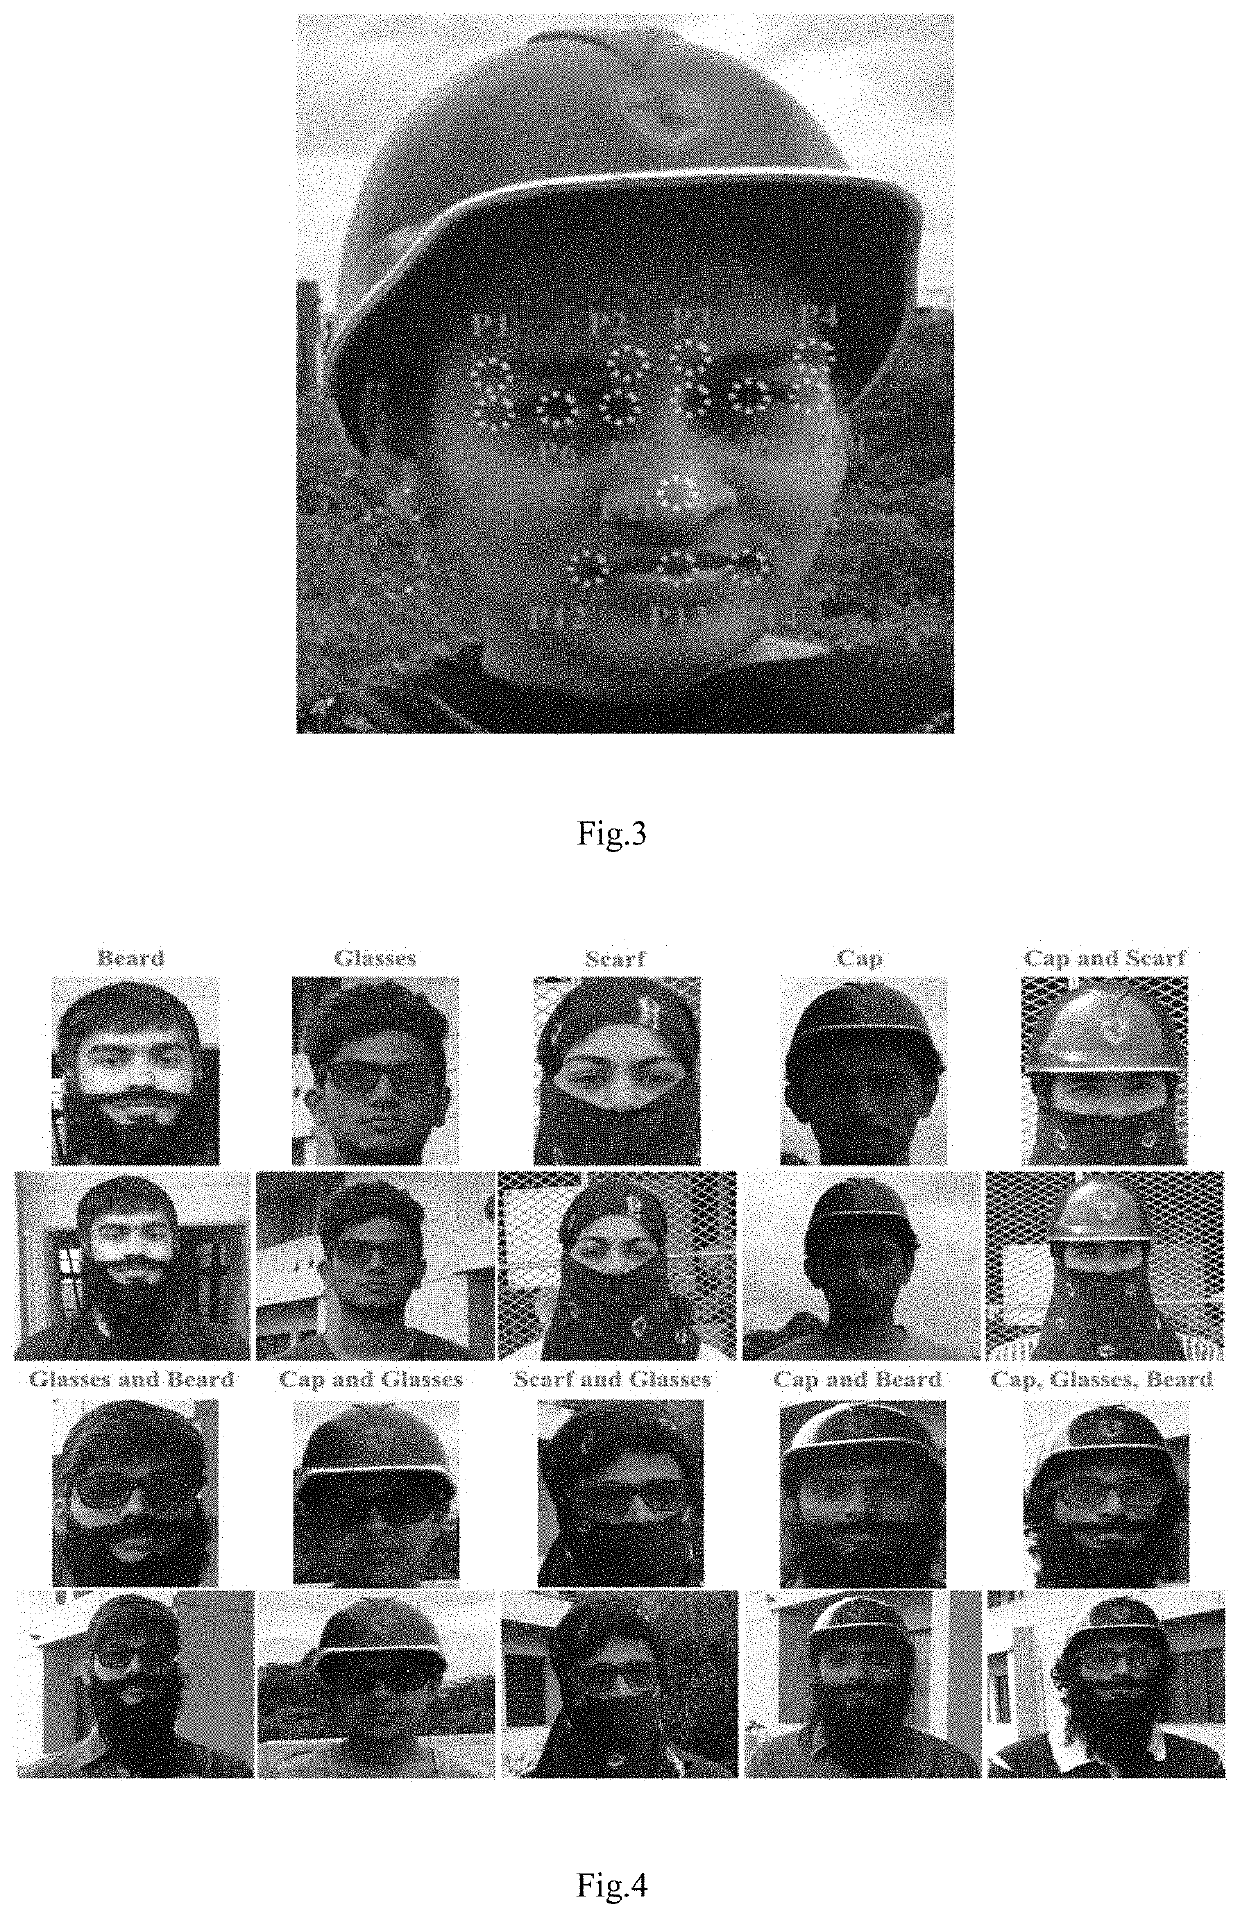 Continuously Evolving and Interactive Disguised Face Identification (DFI) with Facial Key Points using ScatterNet Hybrid Deep Learning (SHDL) Network